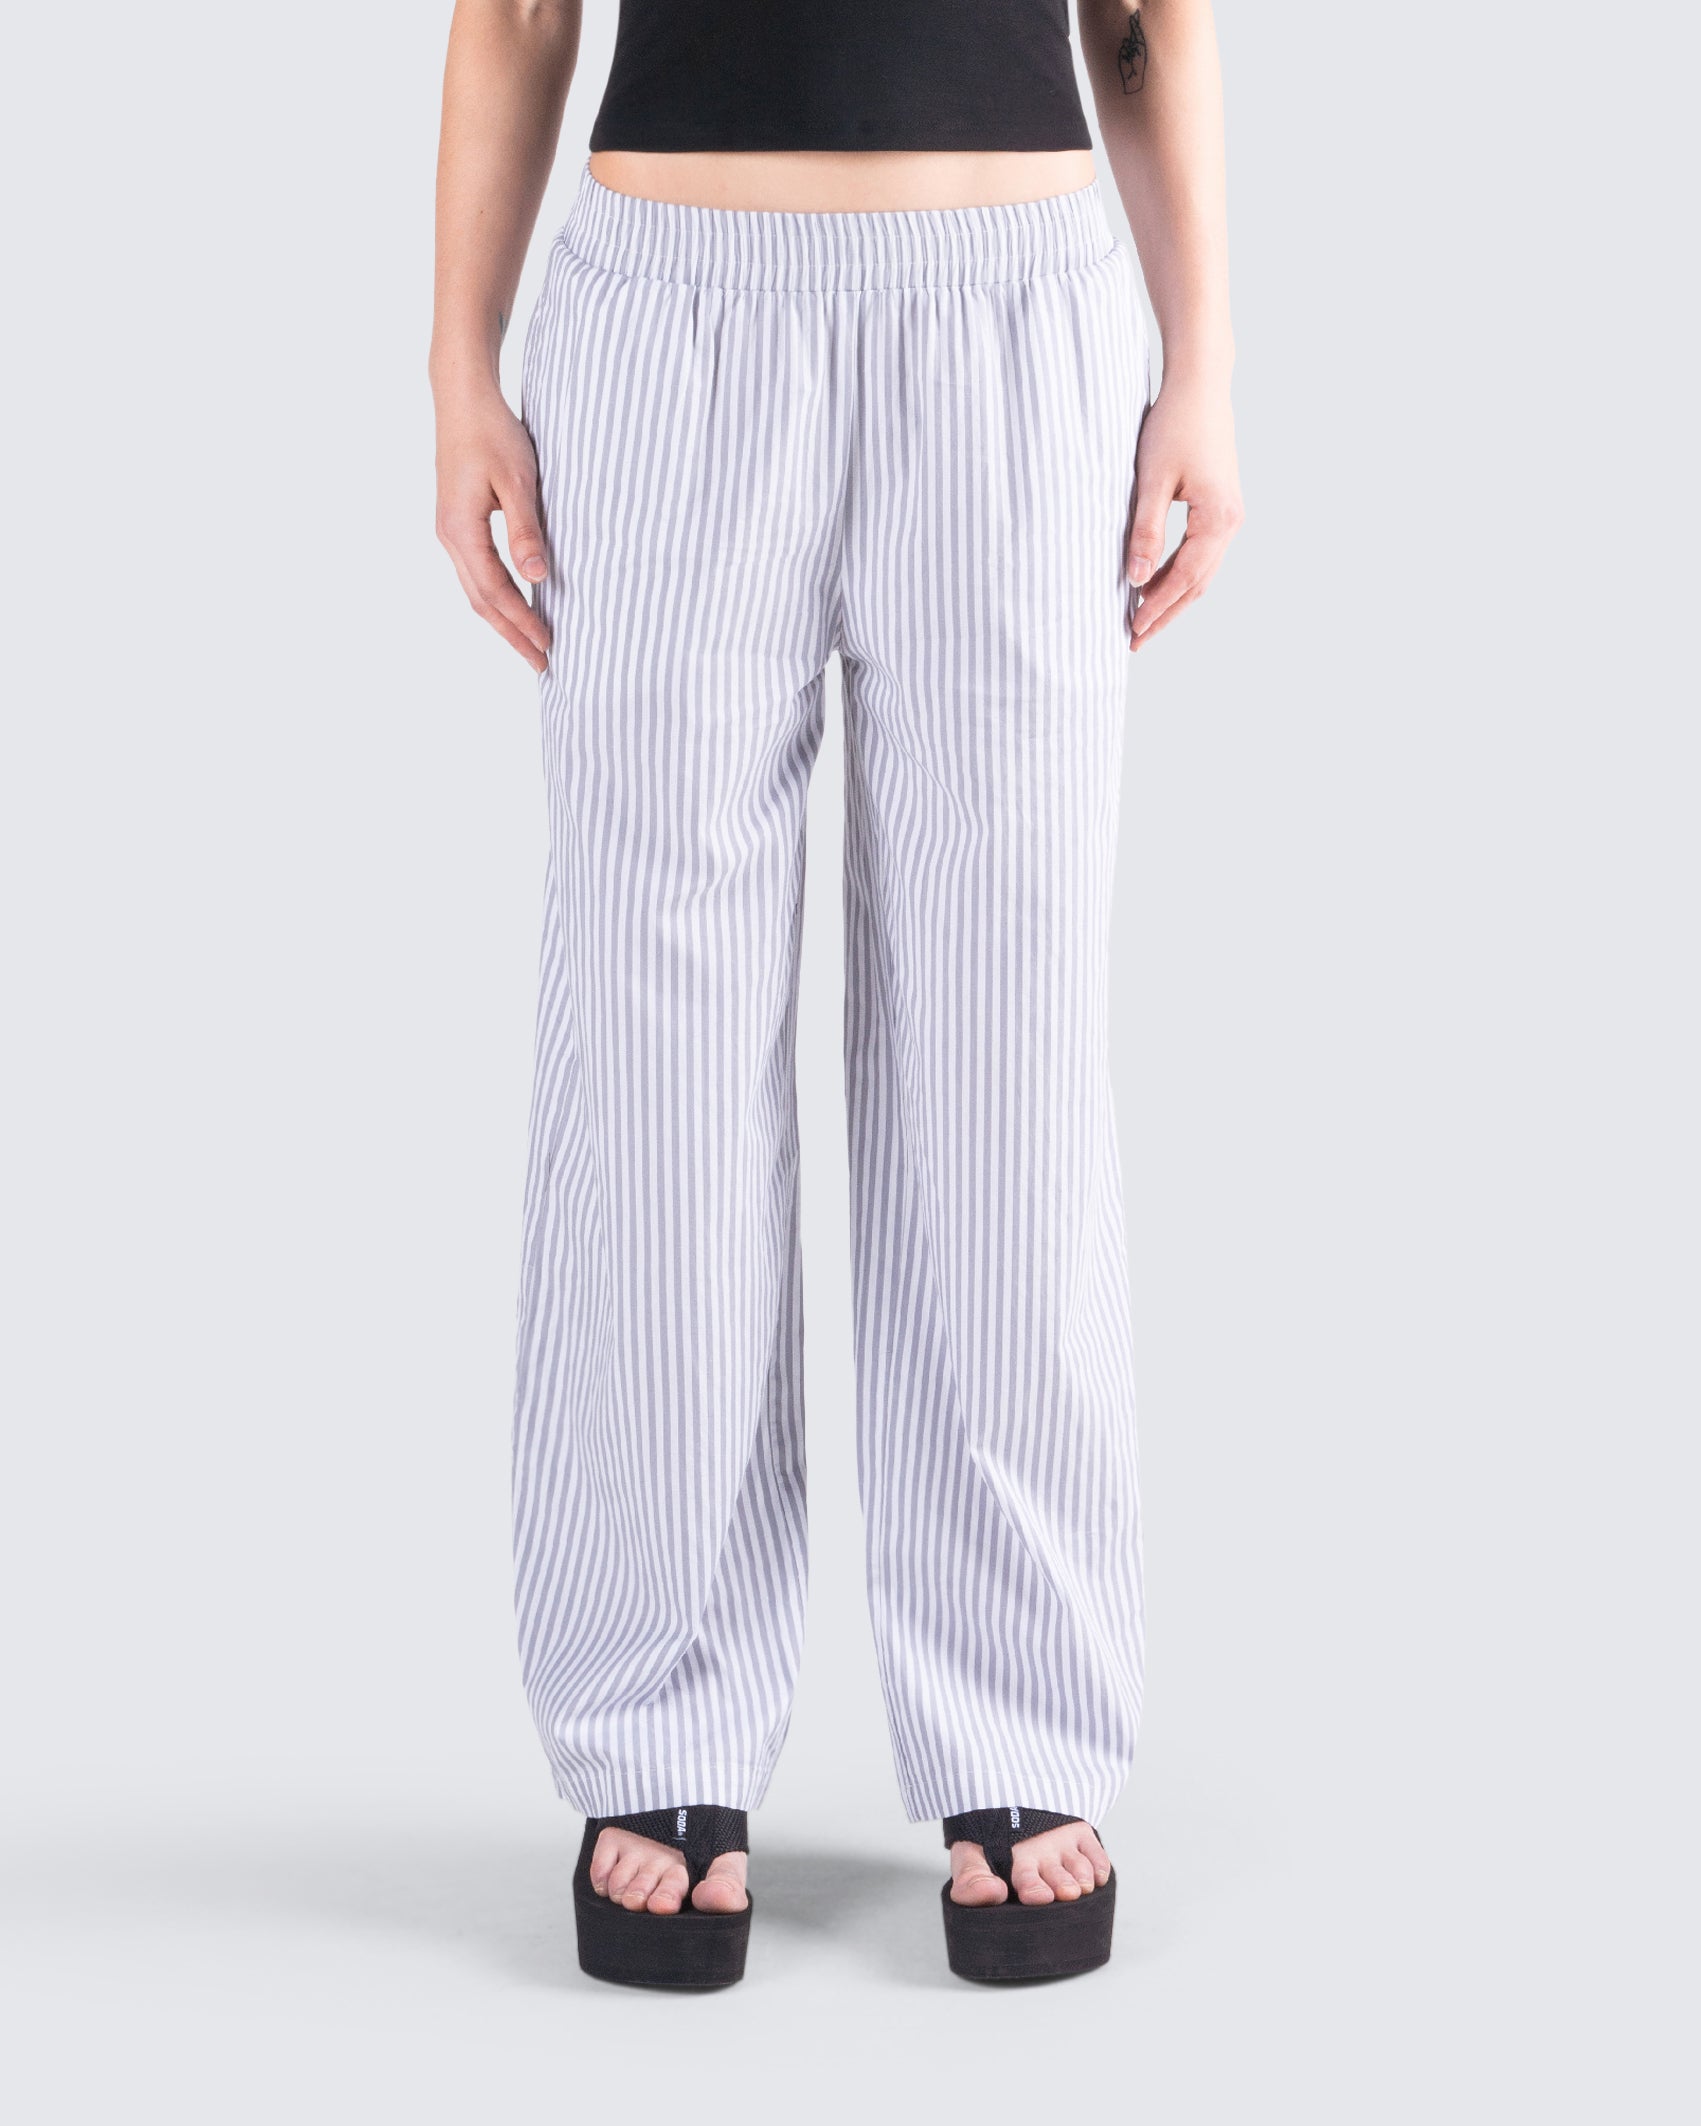 Buy Gray Cotton Solid Women Regular Wear Stripe Pant for Best Price,  Reviews, Free Shipping